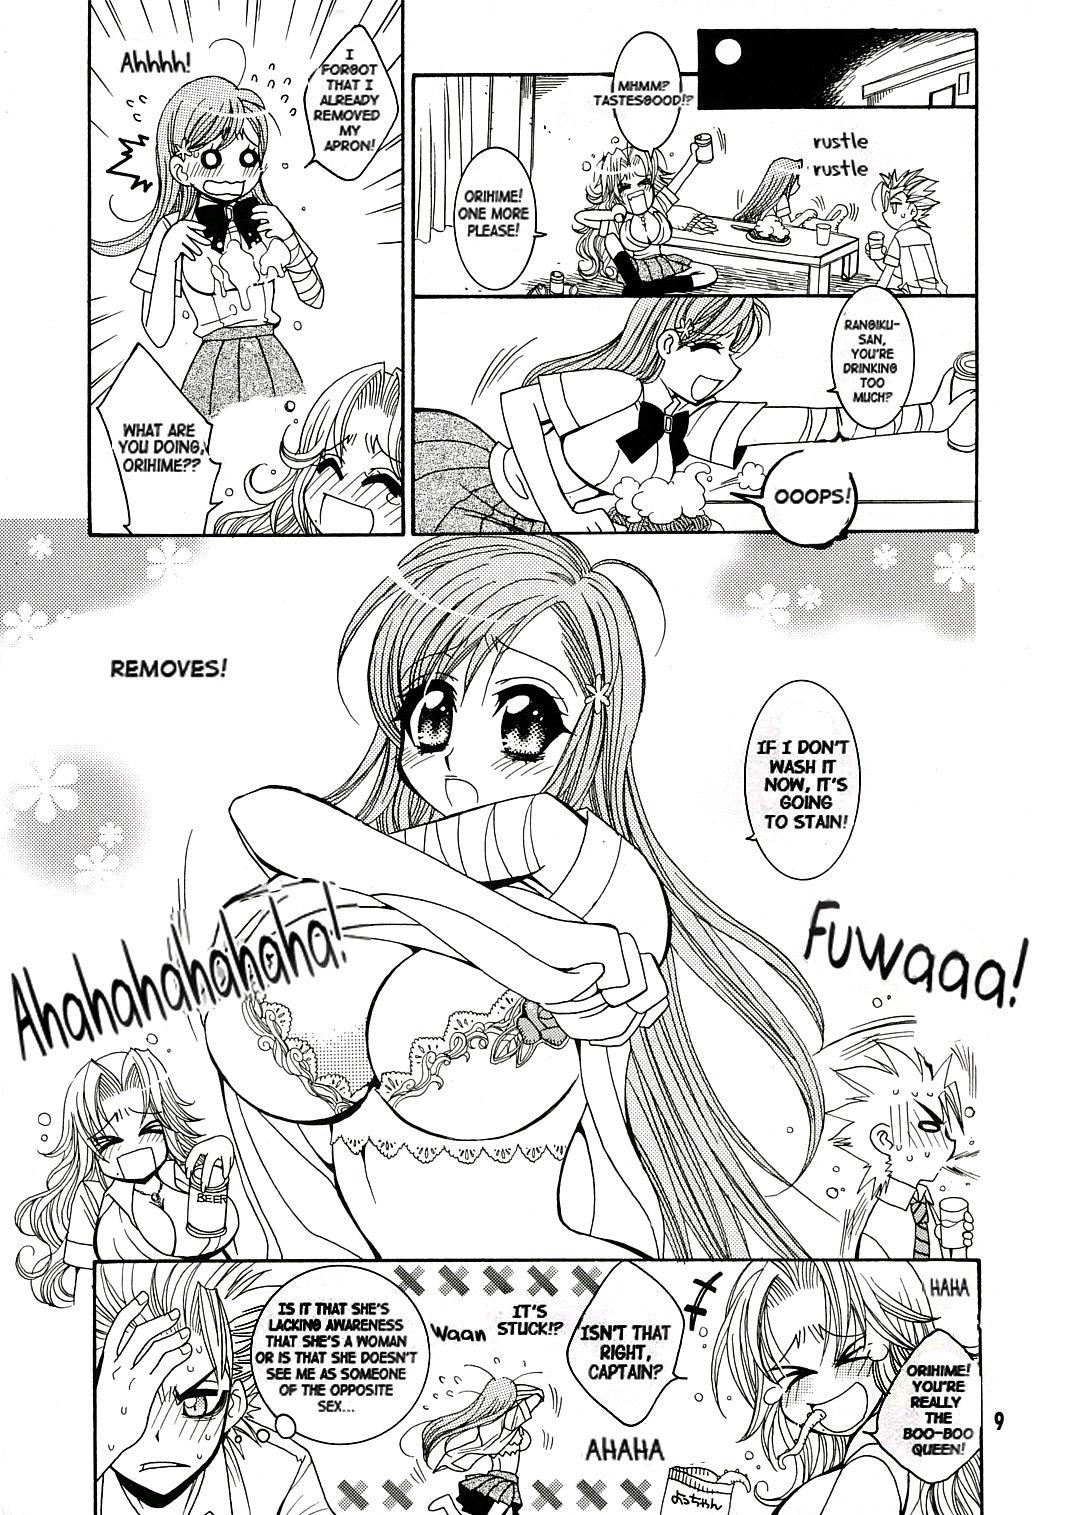 Amazing BABY BLUE! - Bleach Three Some - Page 8